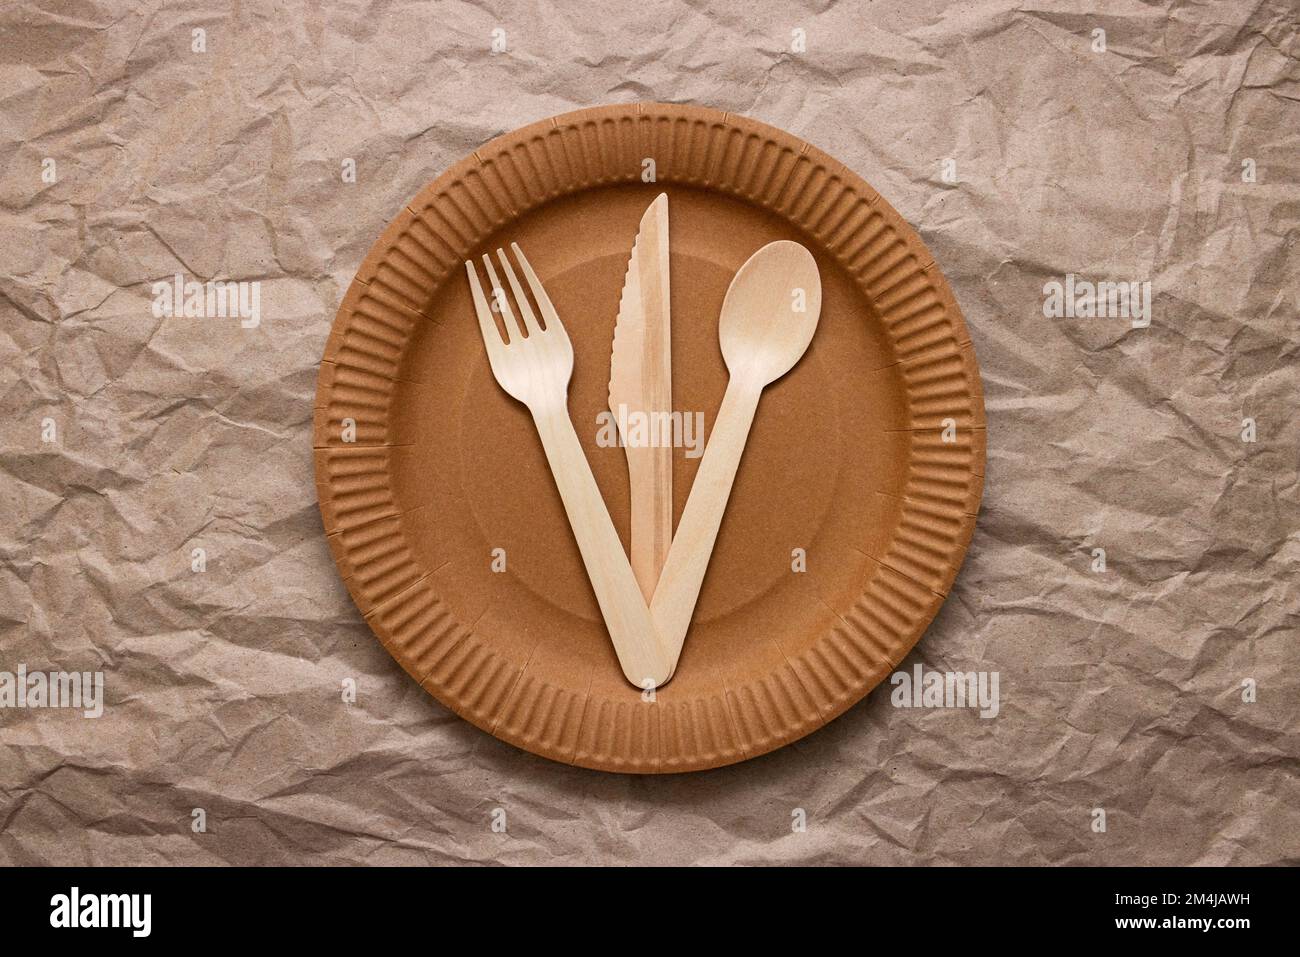 https://c8.alamy.com/comp/2M4JAWH/wooden-fork-spoon-and-knife-on-cardboard-plate-on-crumpled-paper-2M4JAWH.jpg